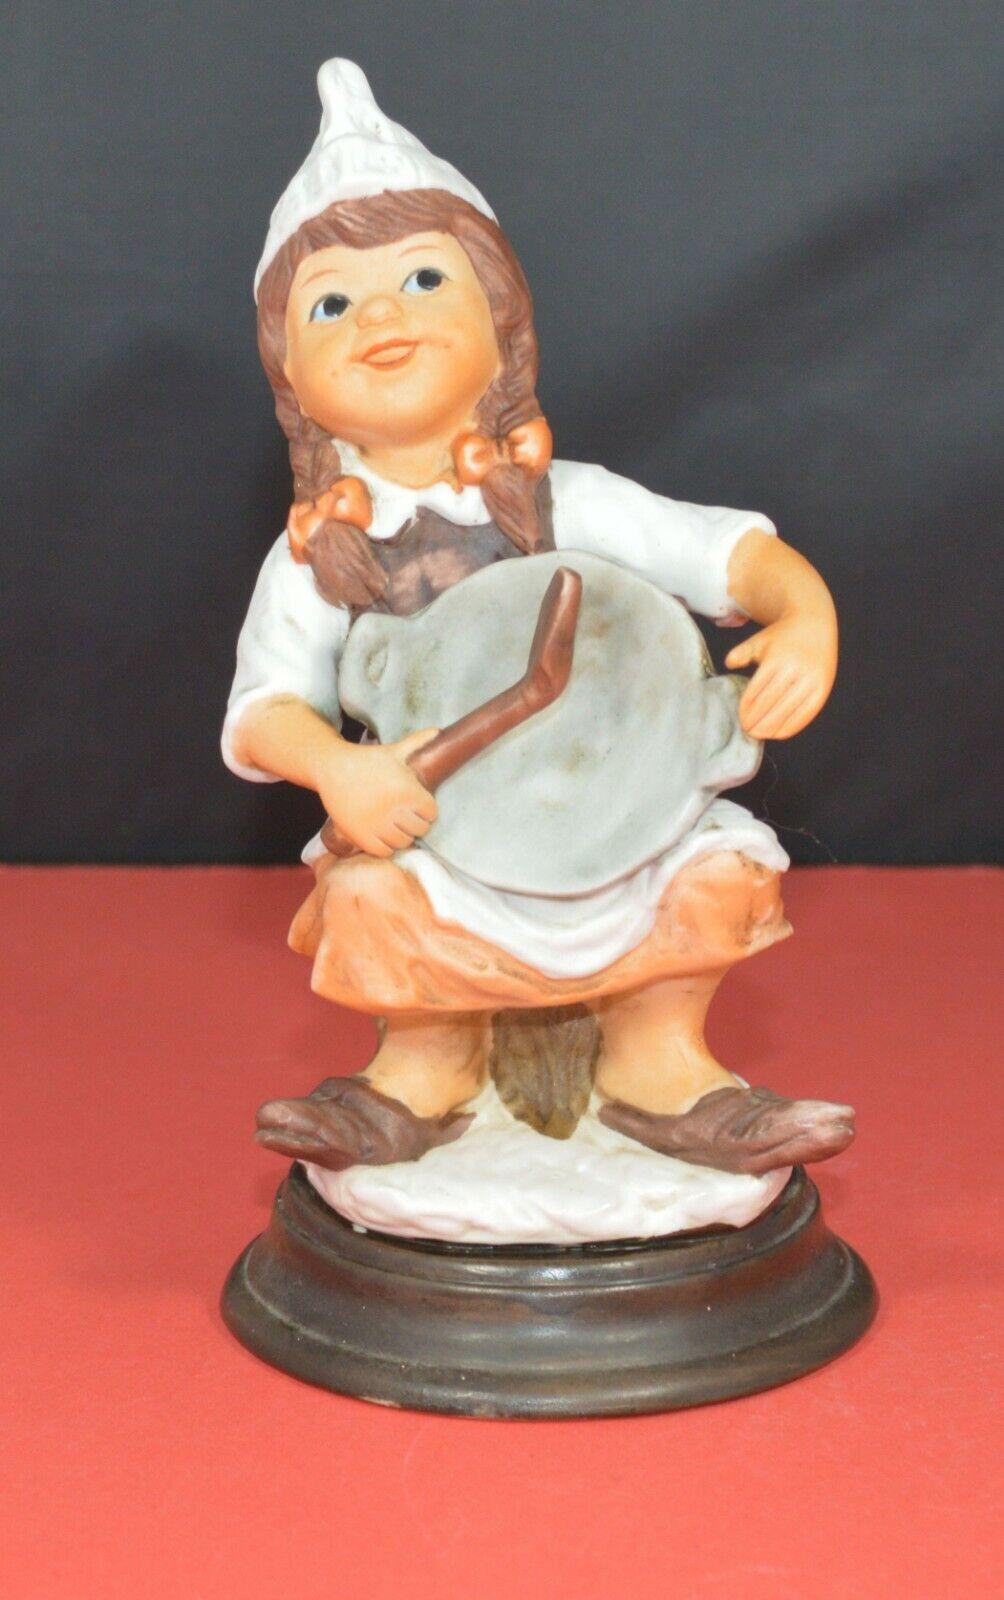 TWO DIFFERENT DECORATIVE FIGURINES OF A YOUNG COOK SITTING ON A TREE STUMP - TMD167207